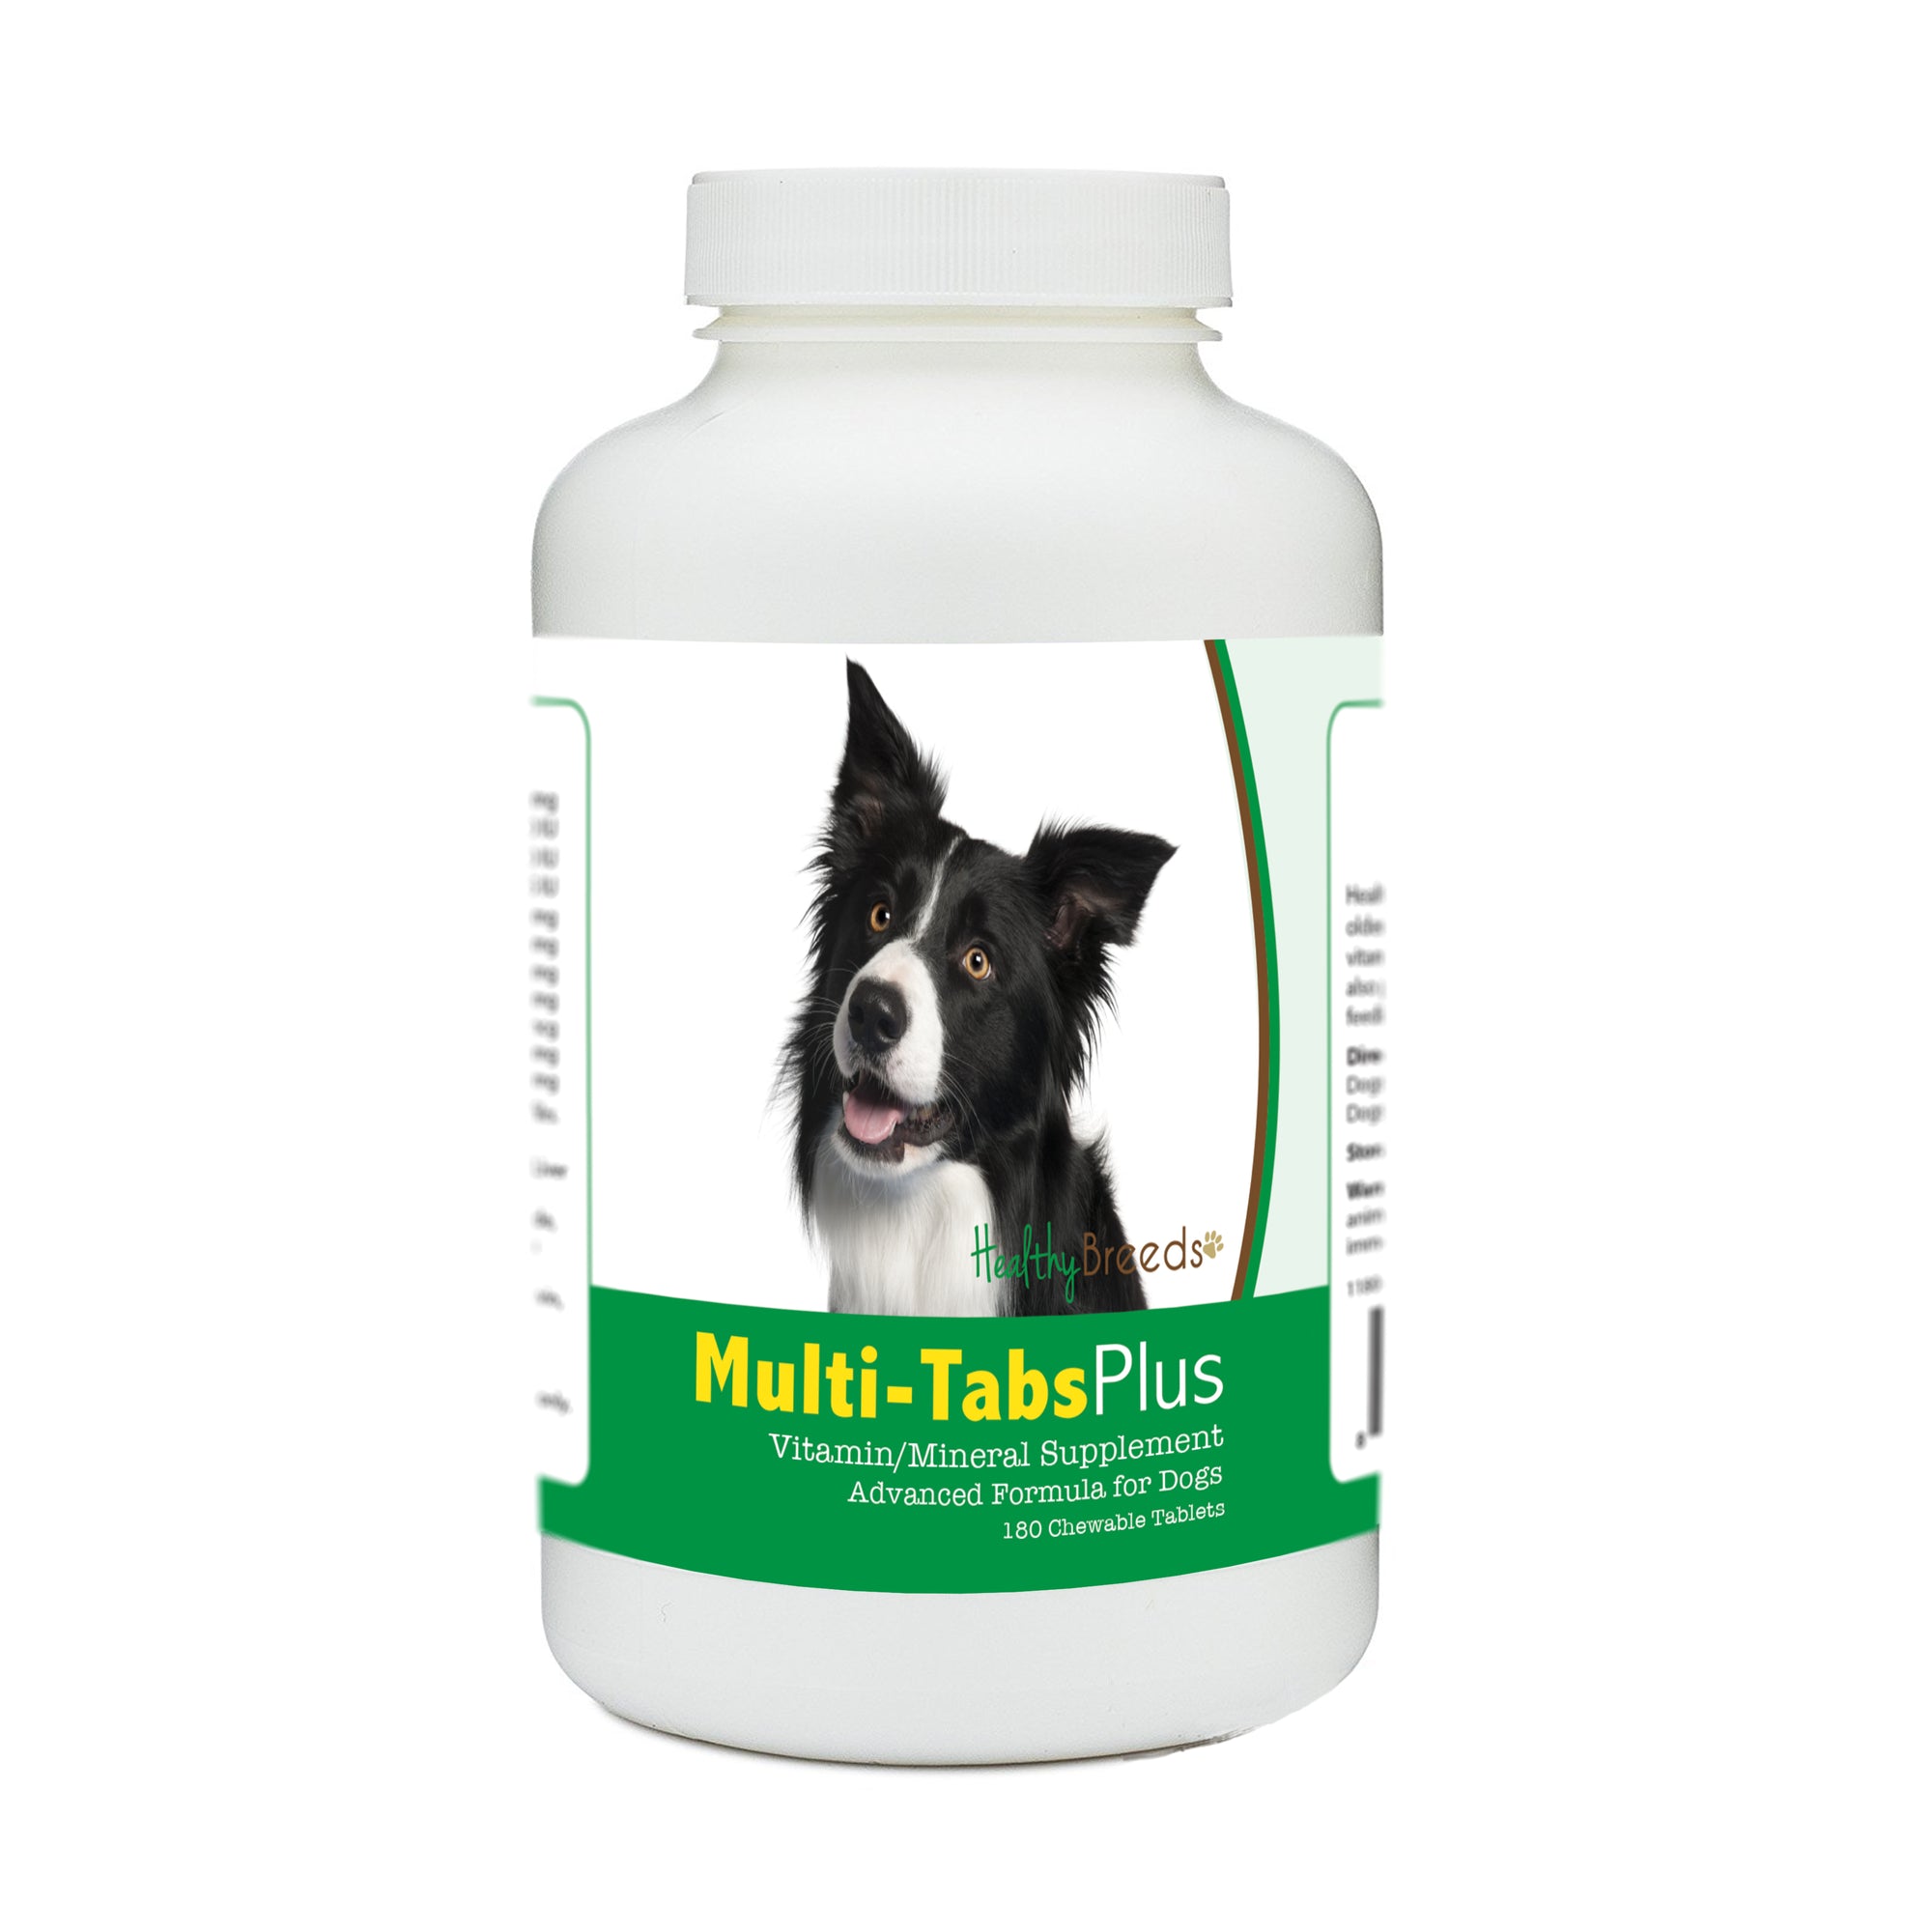 Healthy Breeds Border Collie Multi-Tabs Plus Chewable Tablets 180 Count